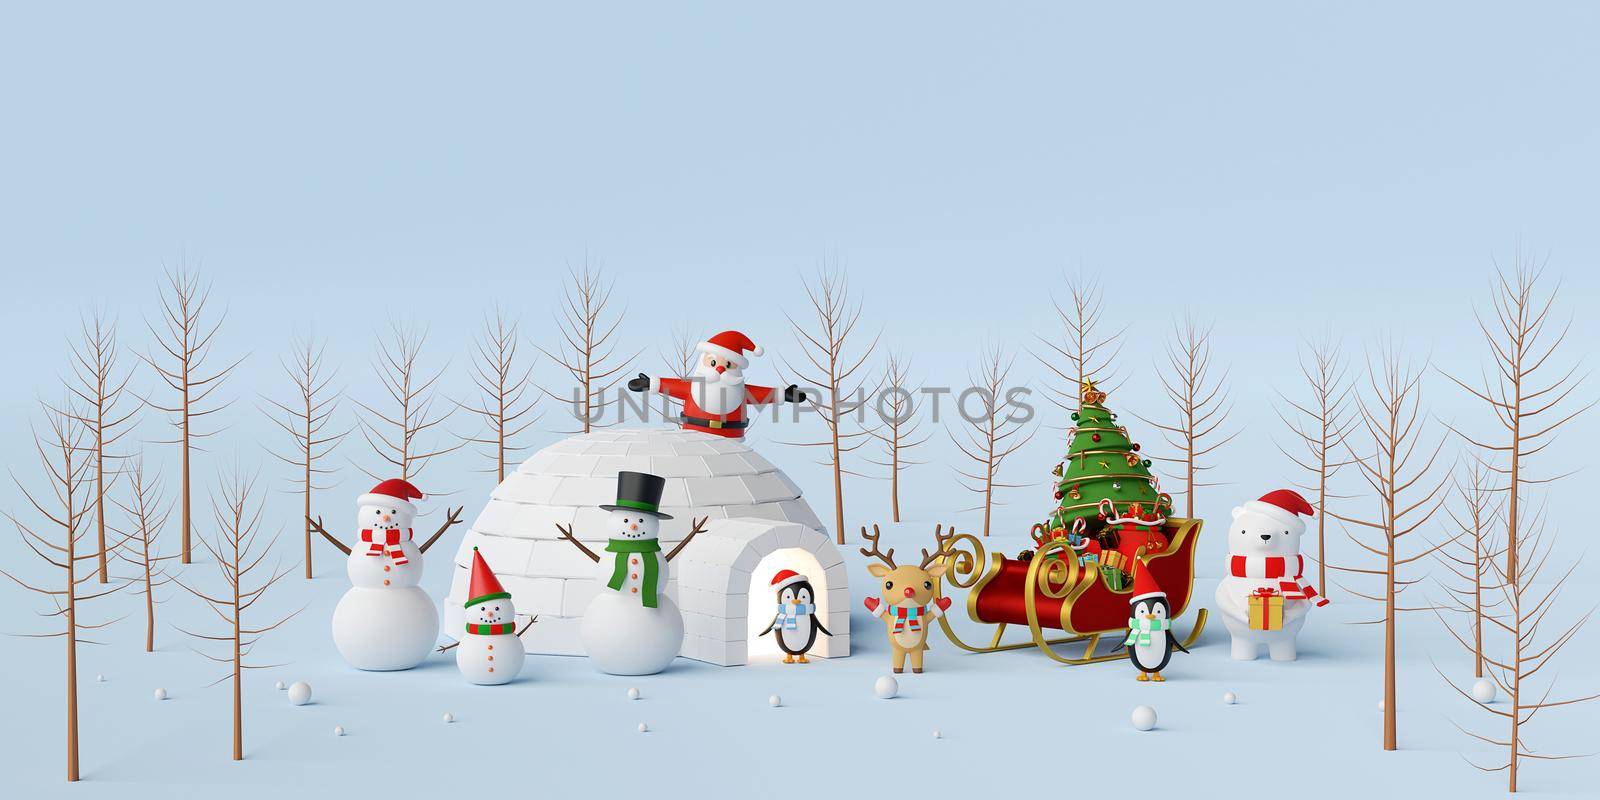 Merry Christmas and Happy New Year, Christmas celebration with Santa Claus and friend, 3d rendering